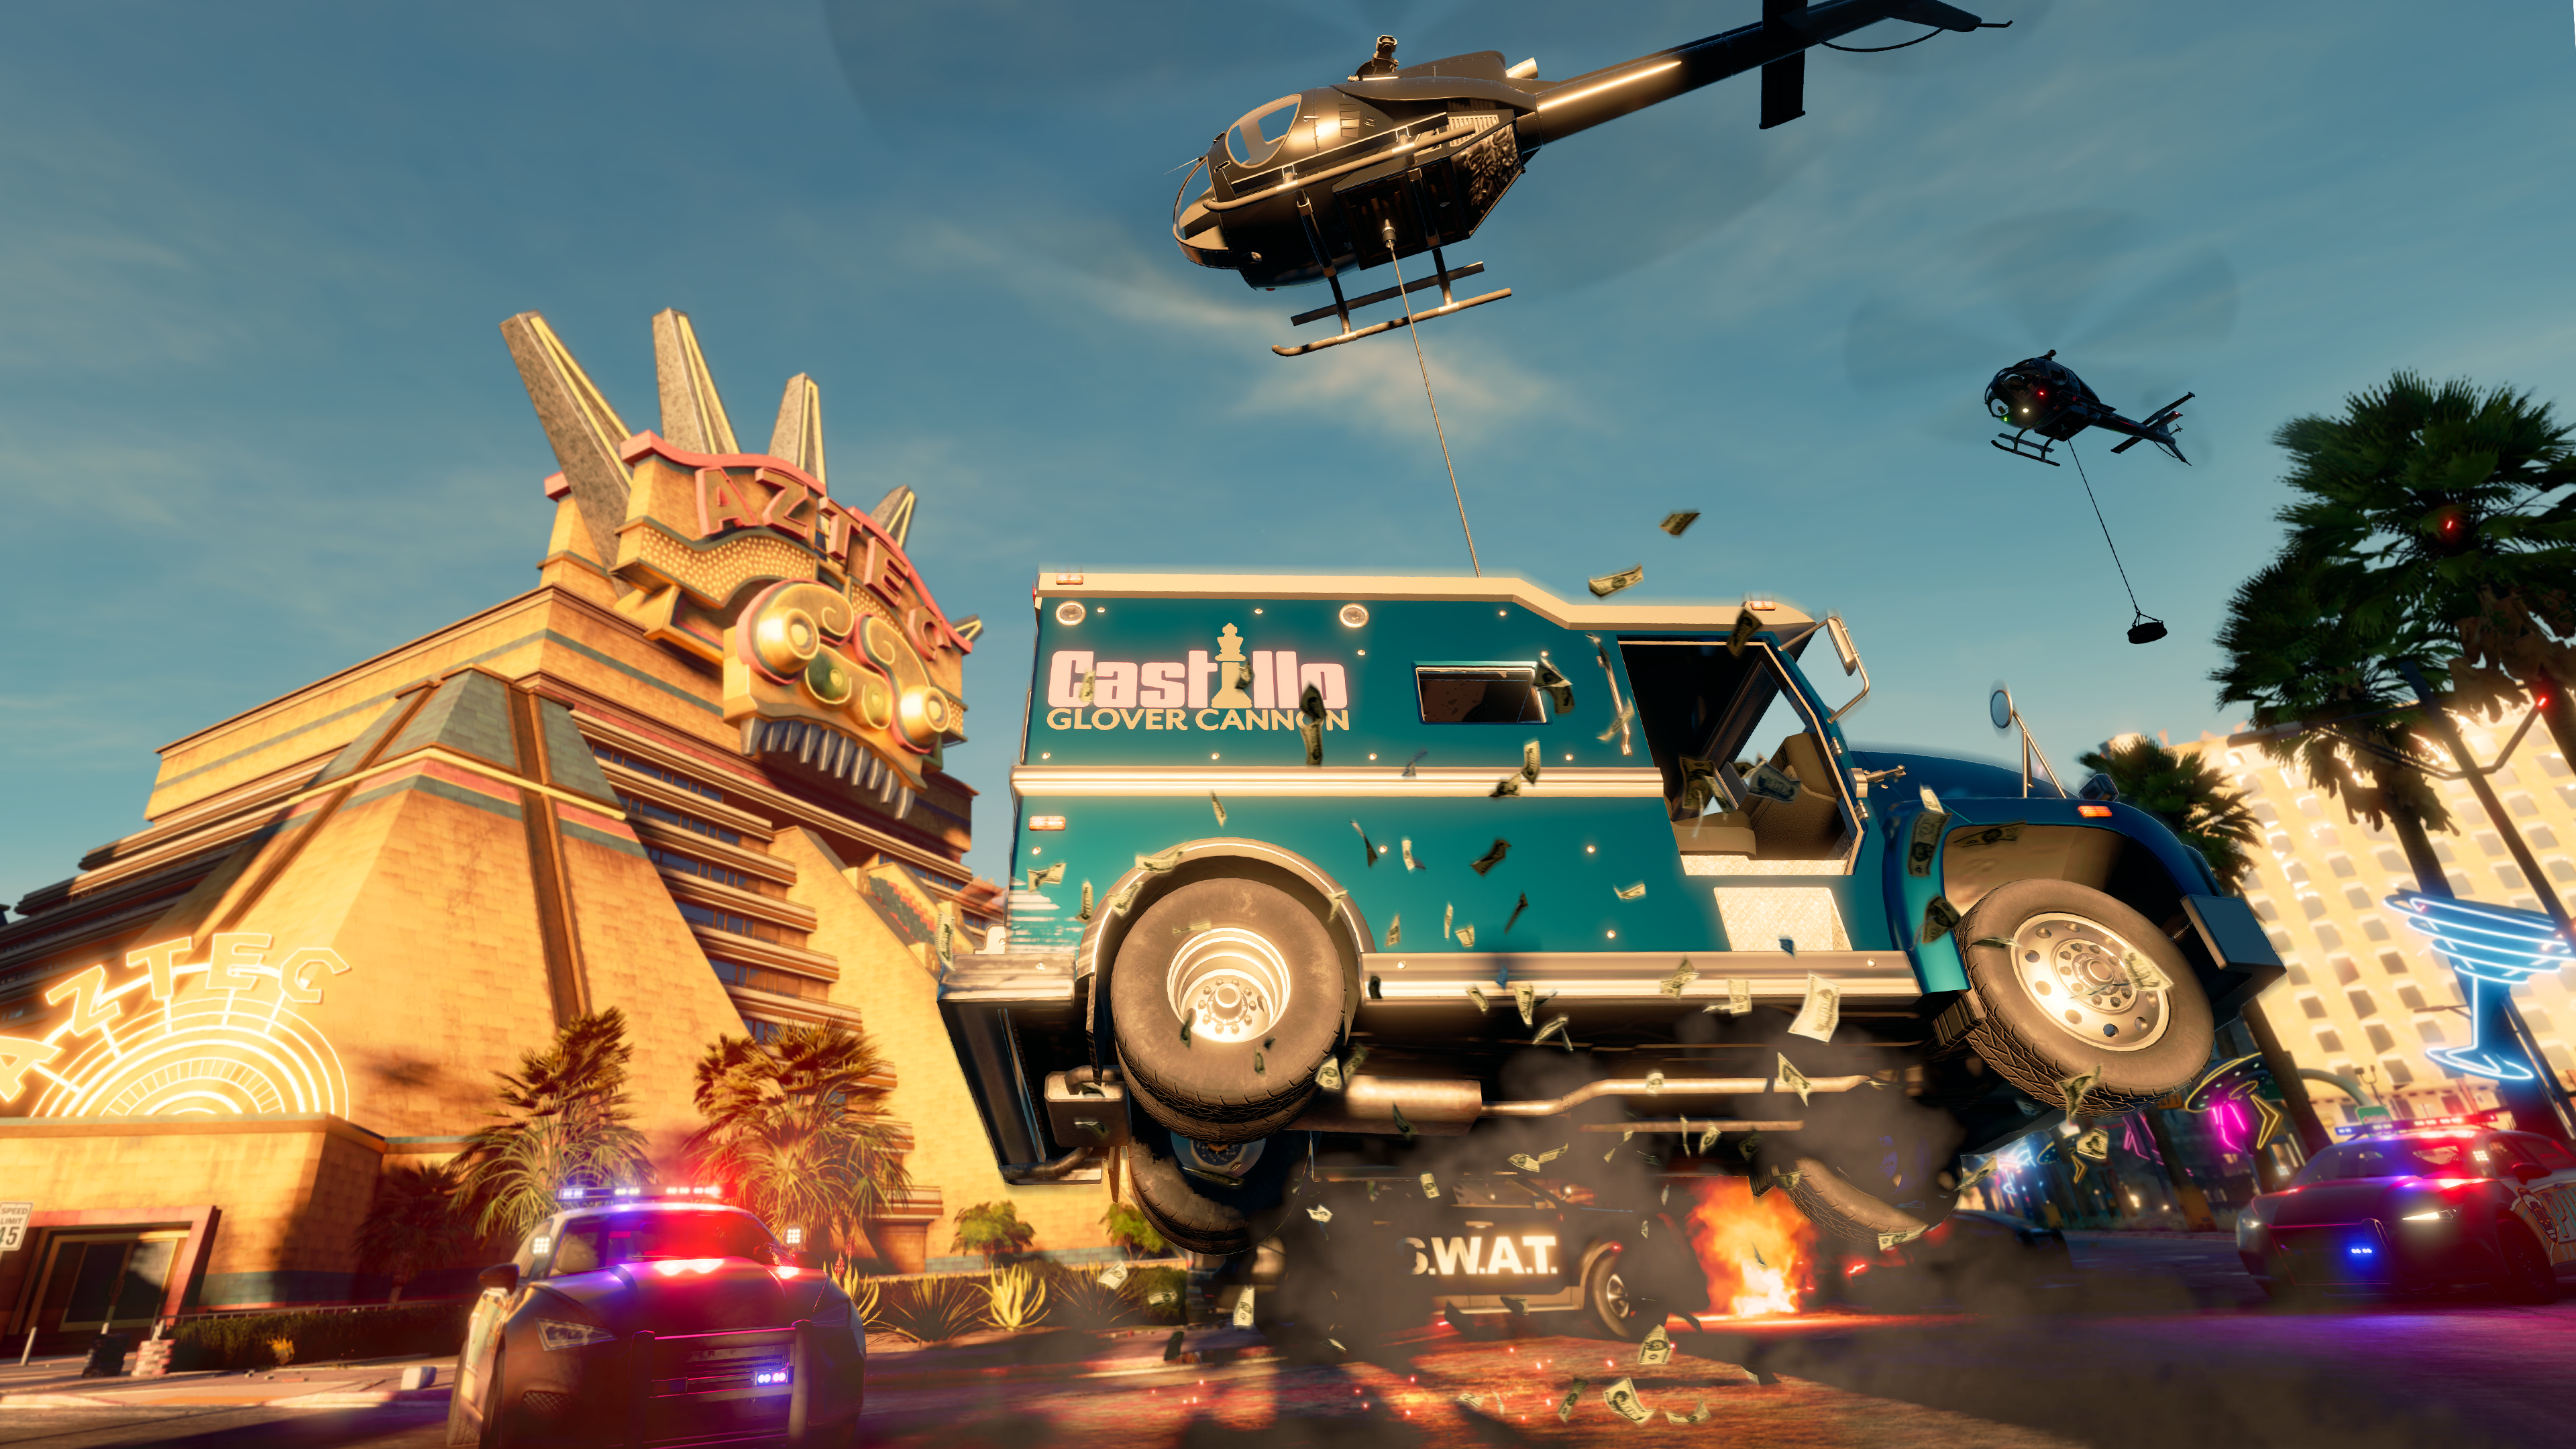 Saints Row reboot screenshot showing a chaotic scene of a truck pursued by police and SWAT vehicles